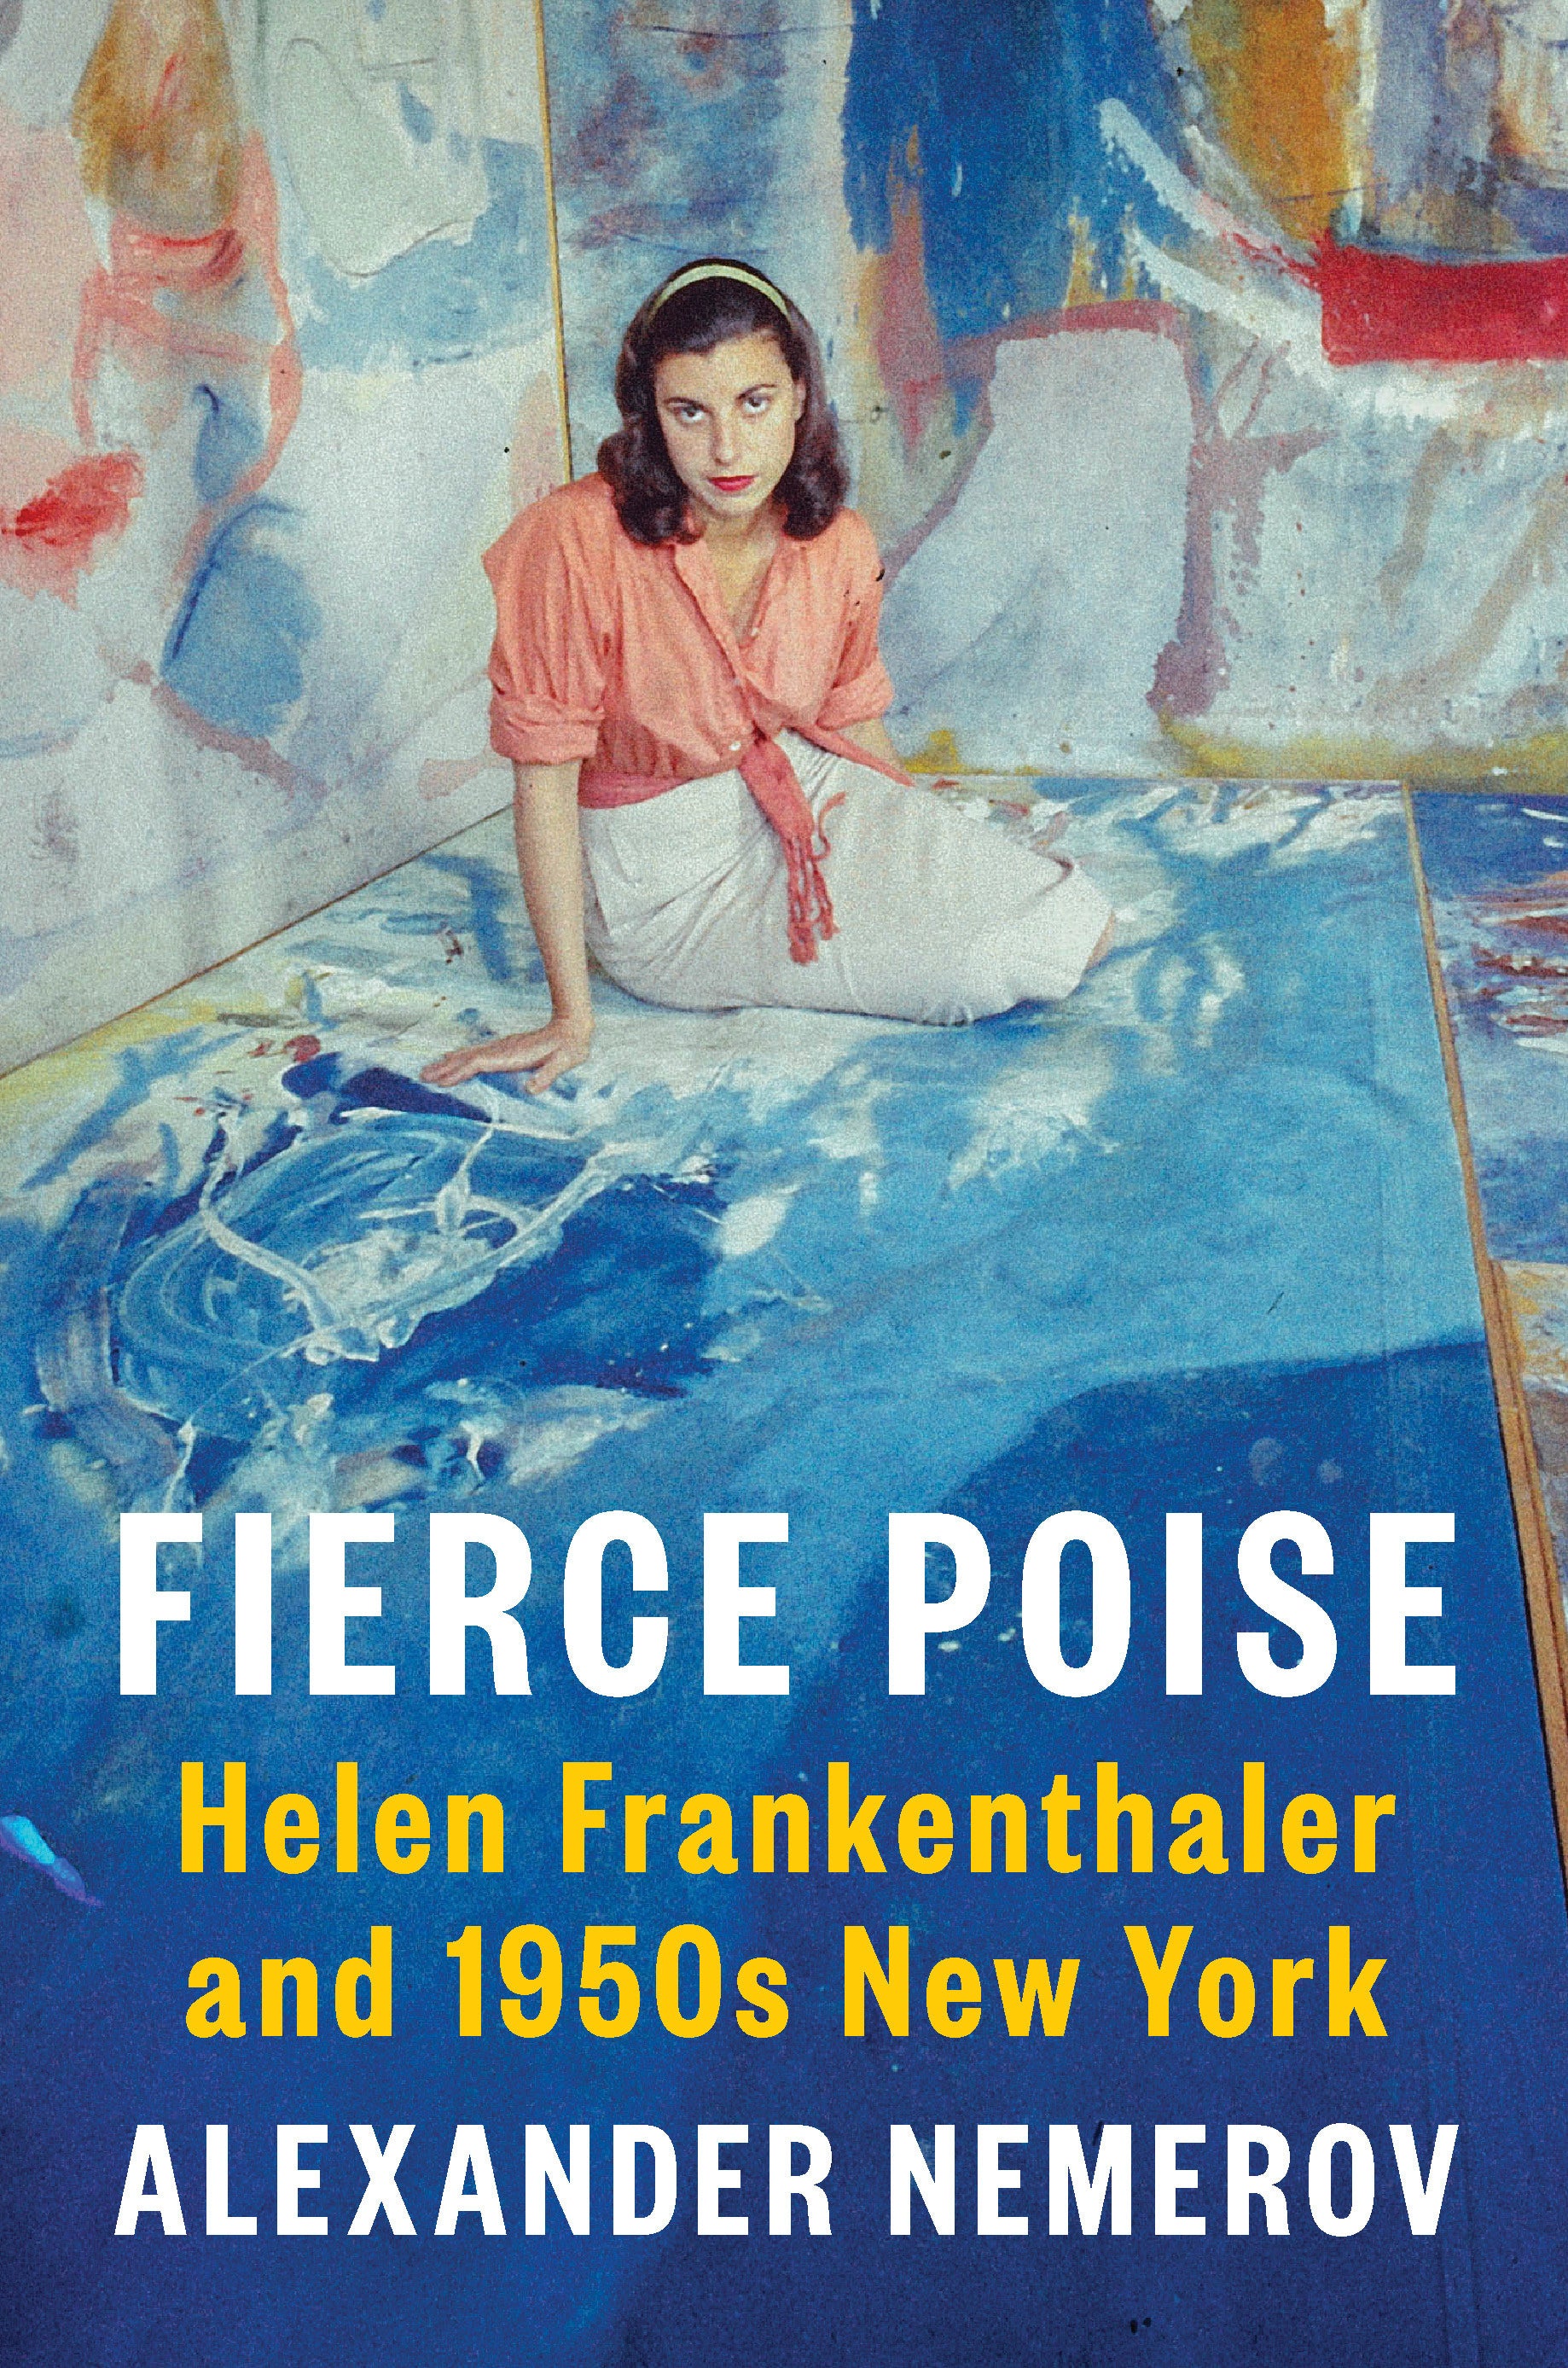 Book Review - Fierce Poise